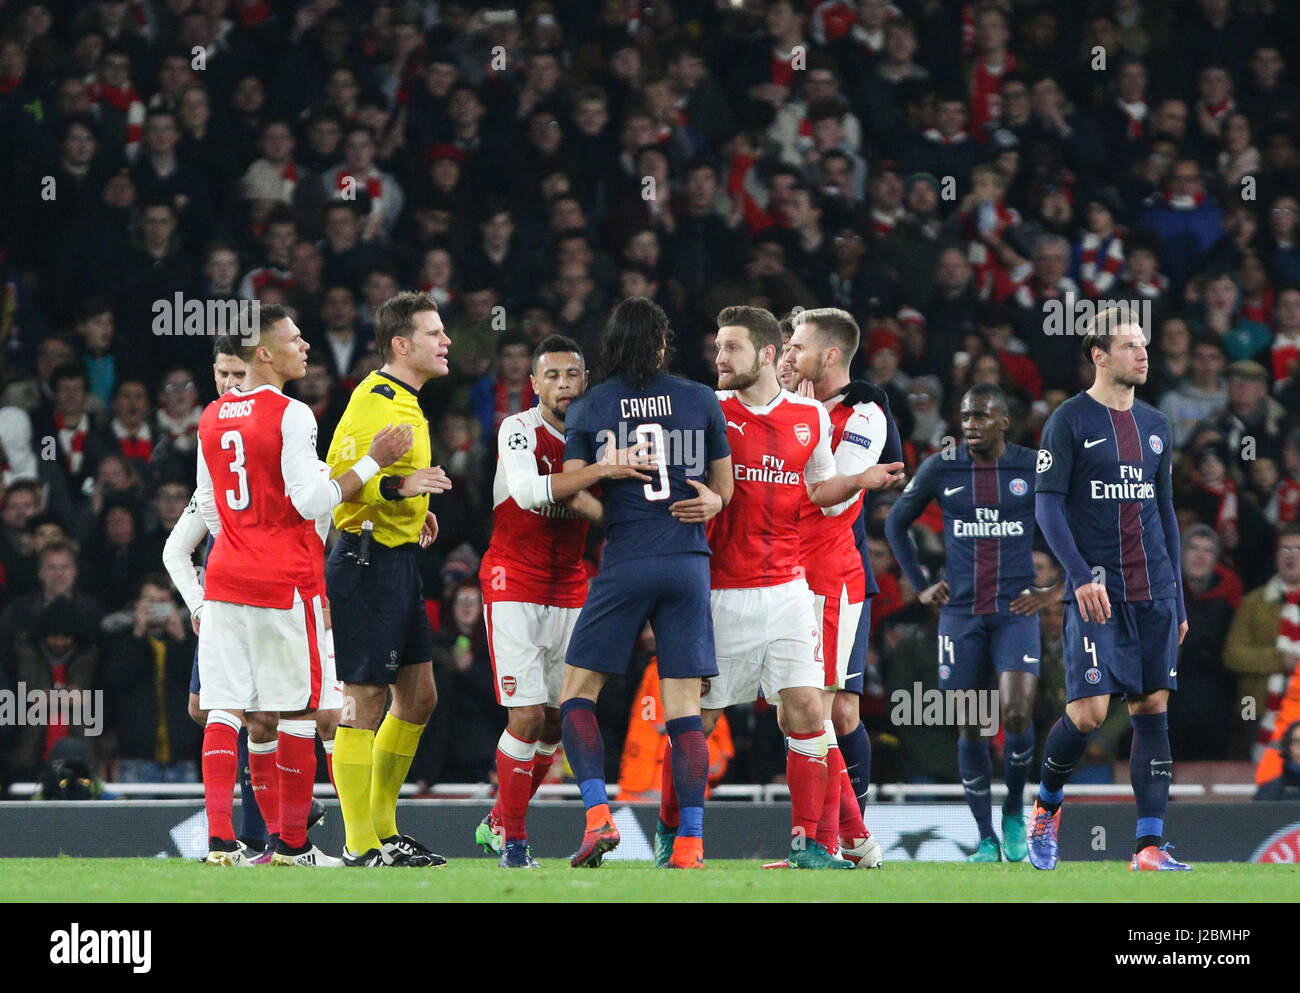 Edinson Cavani of Paris Saint-Germain (9) causes a stir by not giving the ball back during the UEFA Champions League match between Arsenal and Paris Saint-Germain at the Emirates Stadium in London. November 23, 2016. Arron Gent / Telephoto Images EDITORIAL USE ONLY  FA Premier League and Football League images are subject to DataCo Licence see www.football-dataco.com Stock Photo